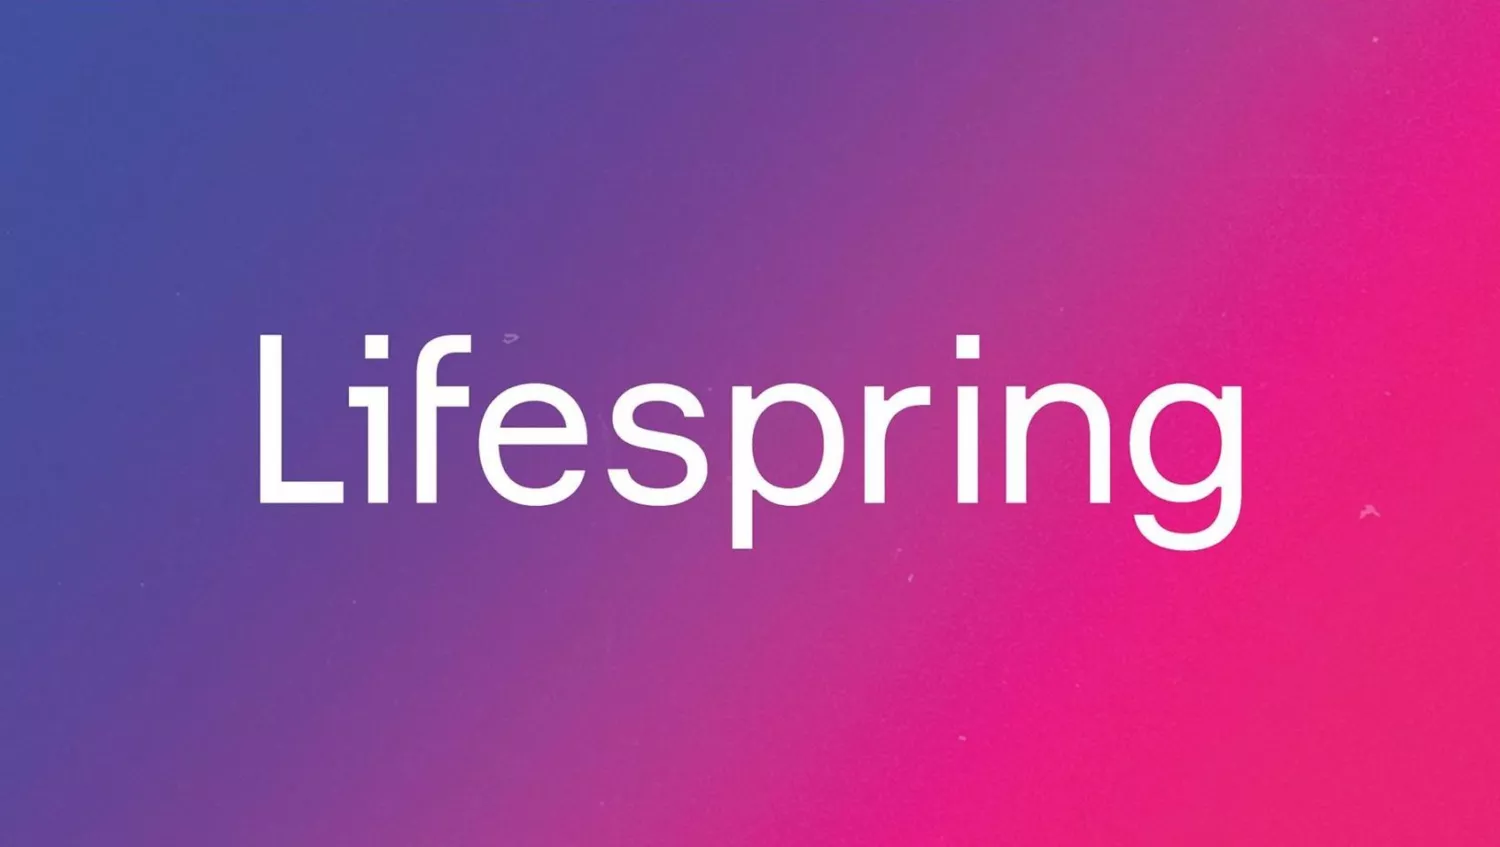 Lifespring Online Services